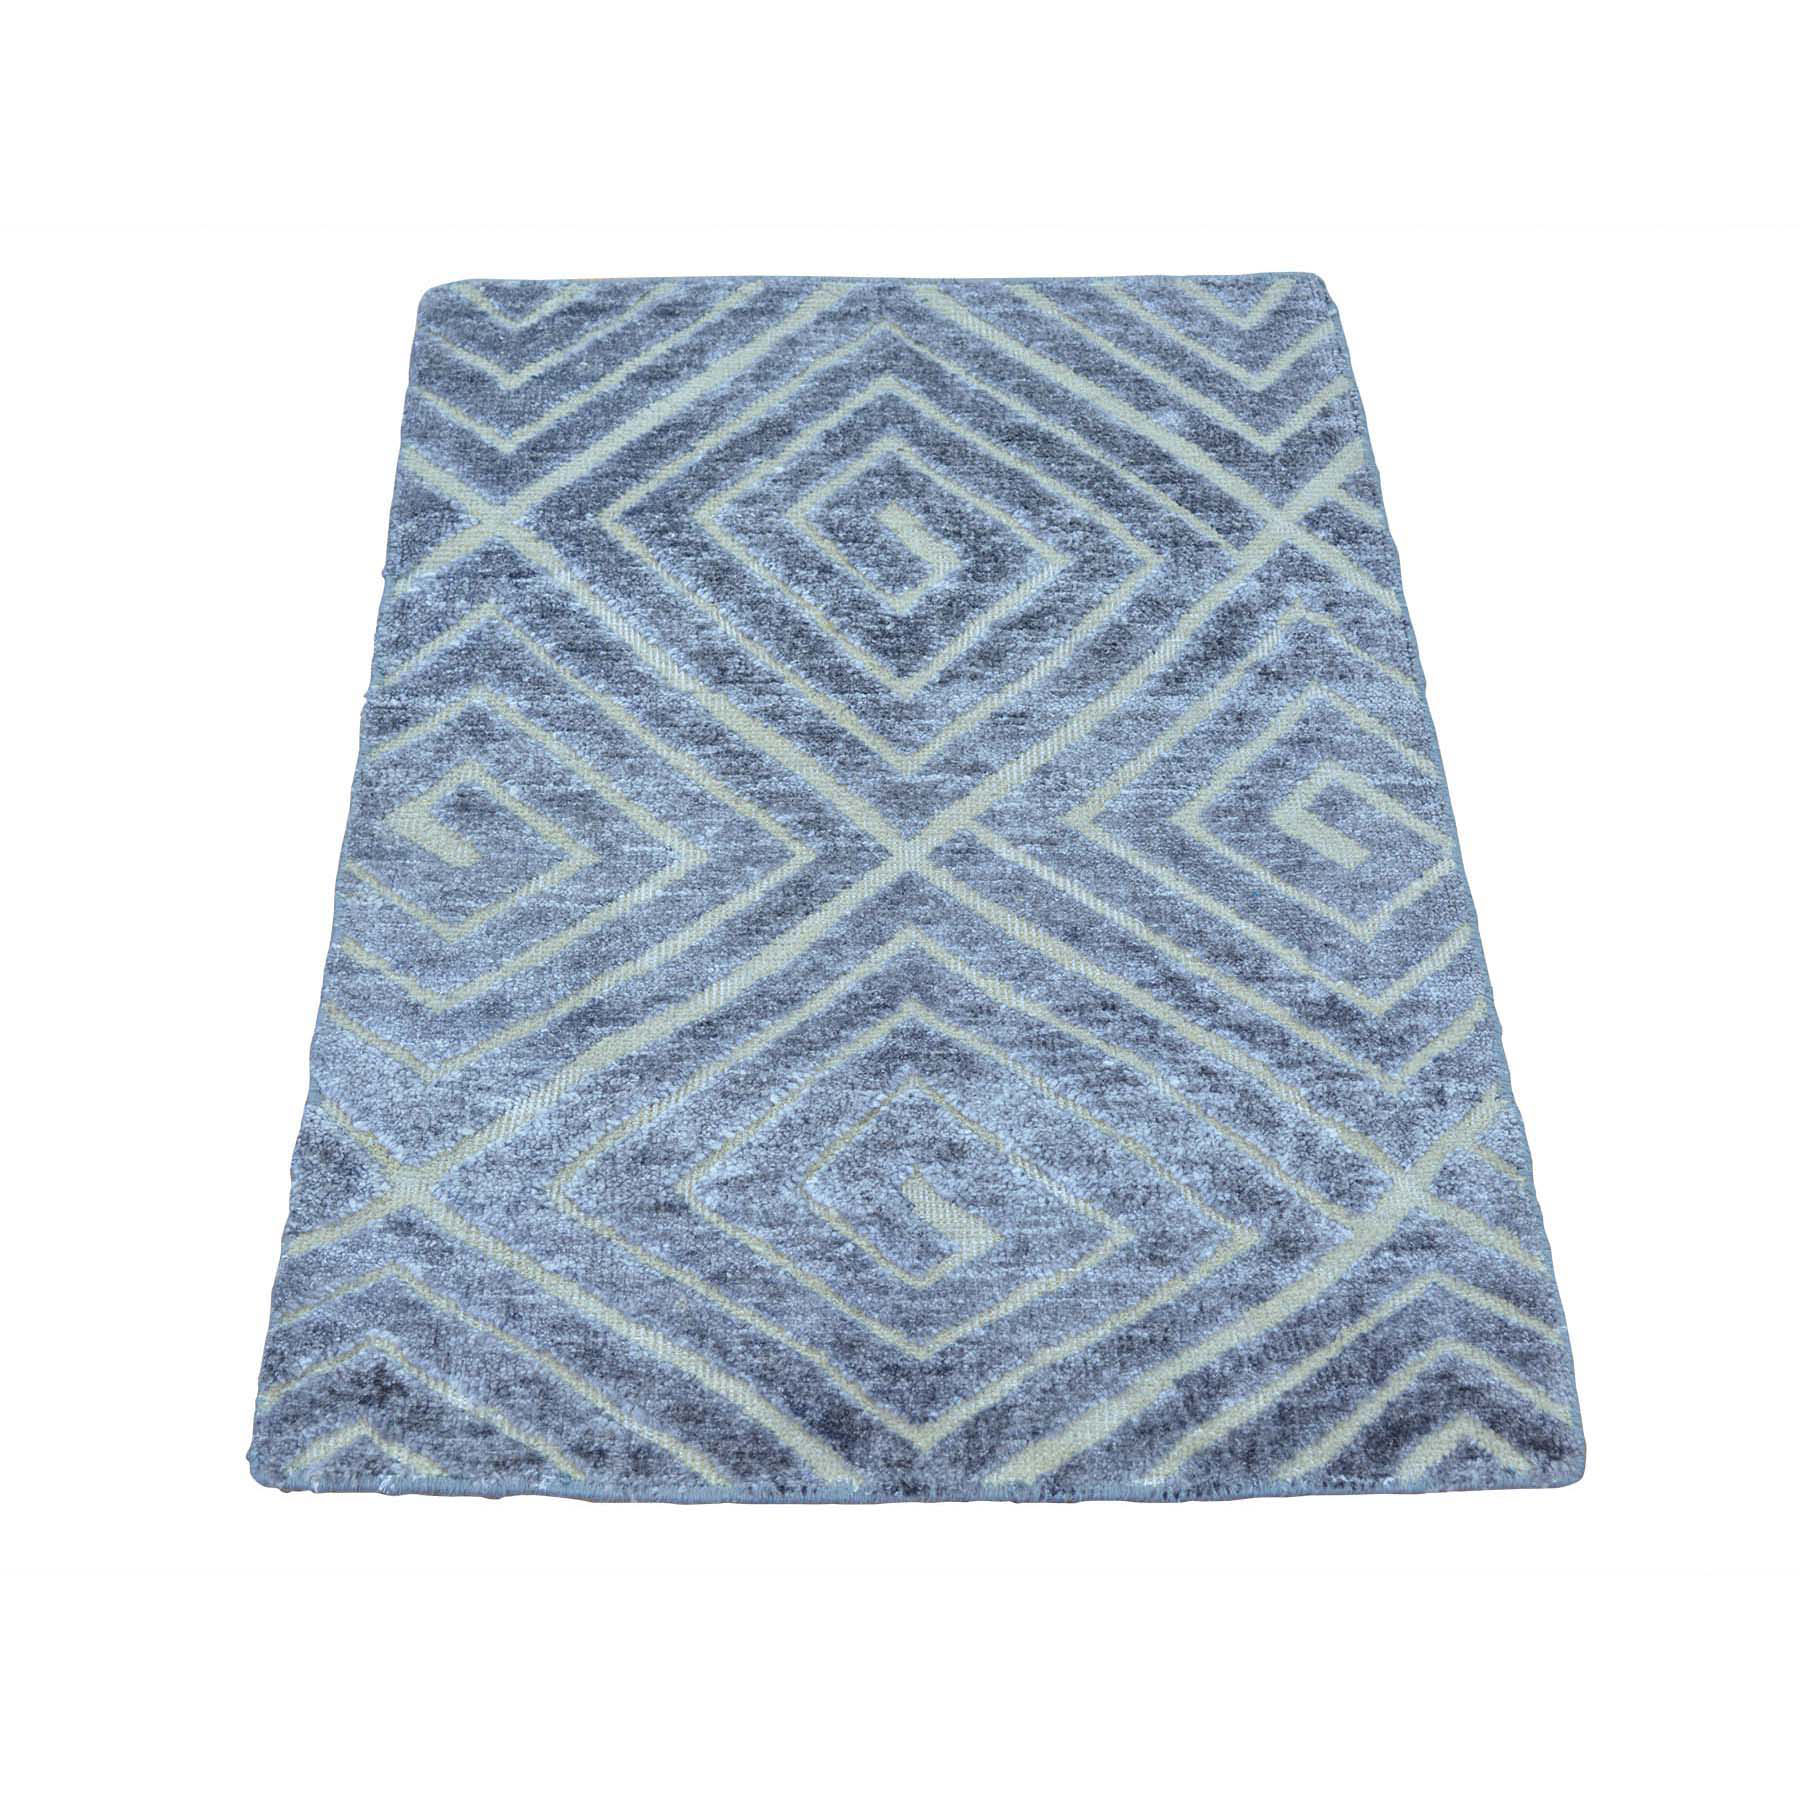 2- x 3- Wool and Silk High and Low Pile Modern Hand Knotted Rug 